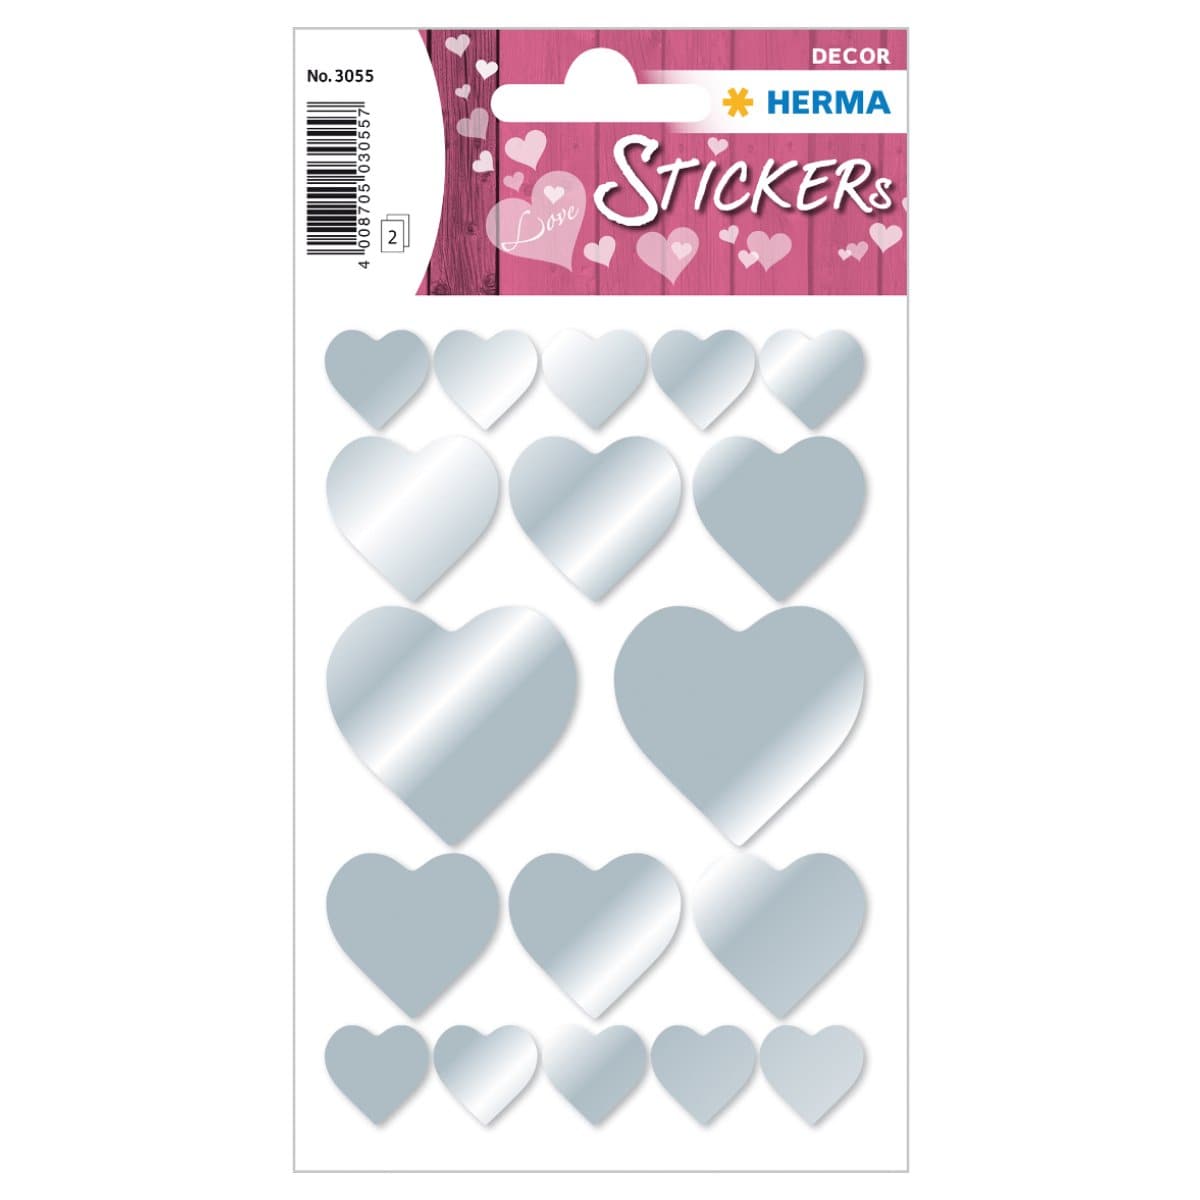 Herma Decor Stickers HEARTS, 2 sheets/pack, Silver